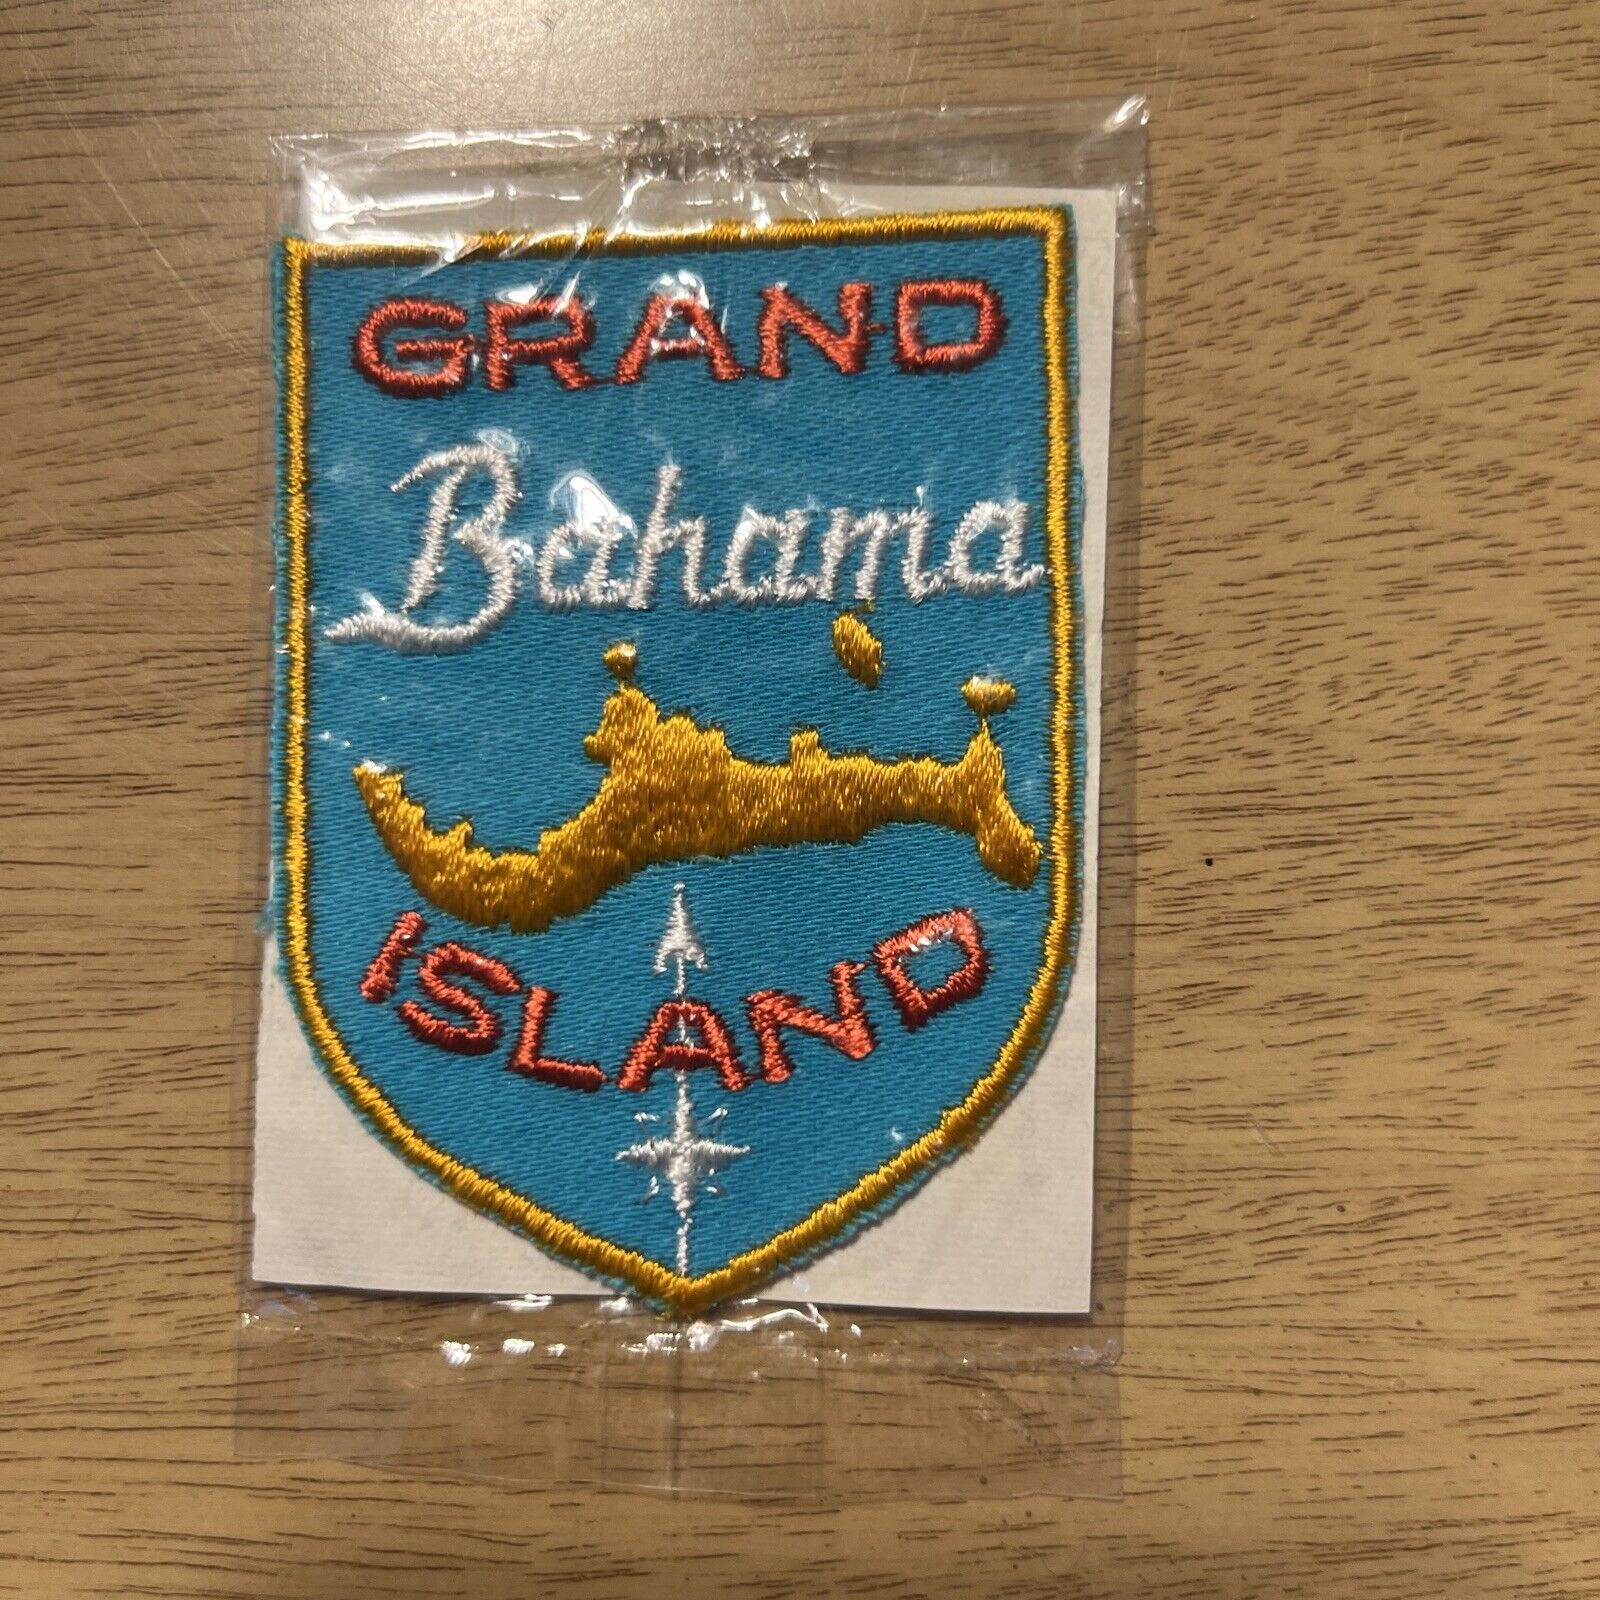 Vintage Travel Patch Bahamas  1960s